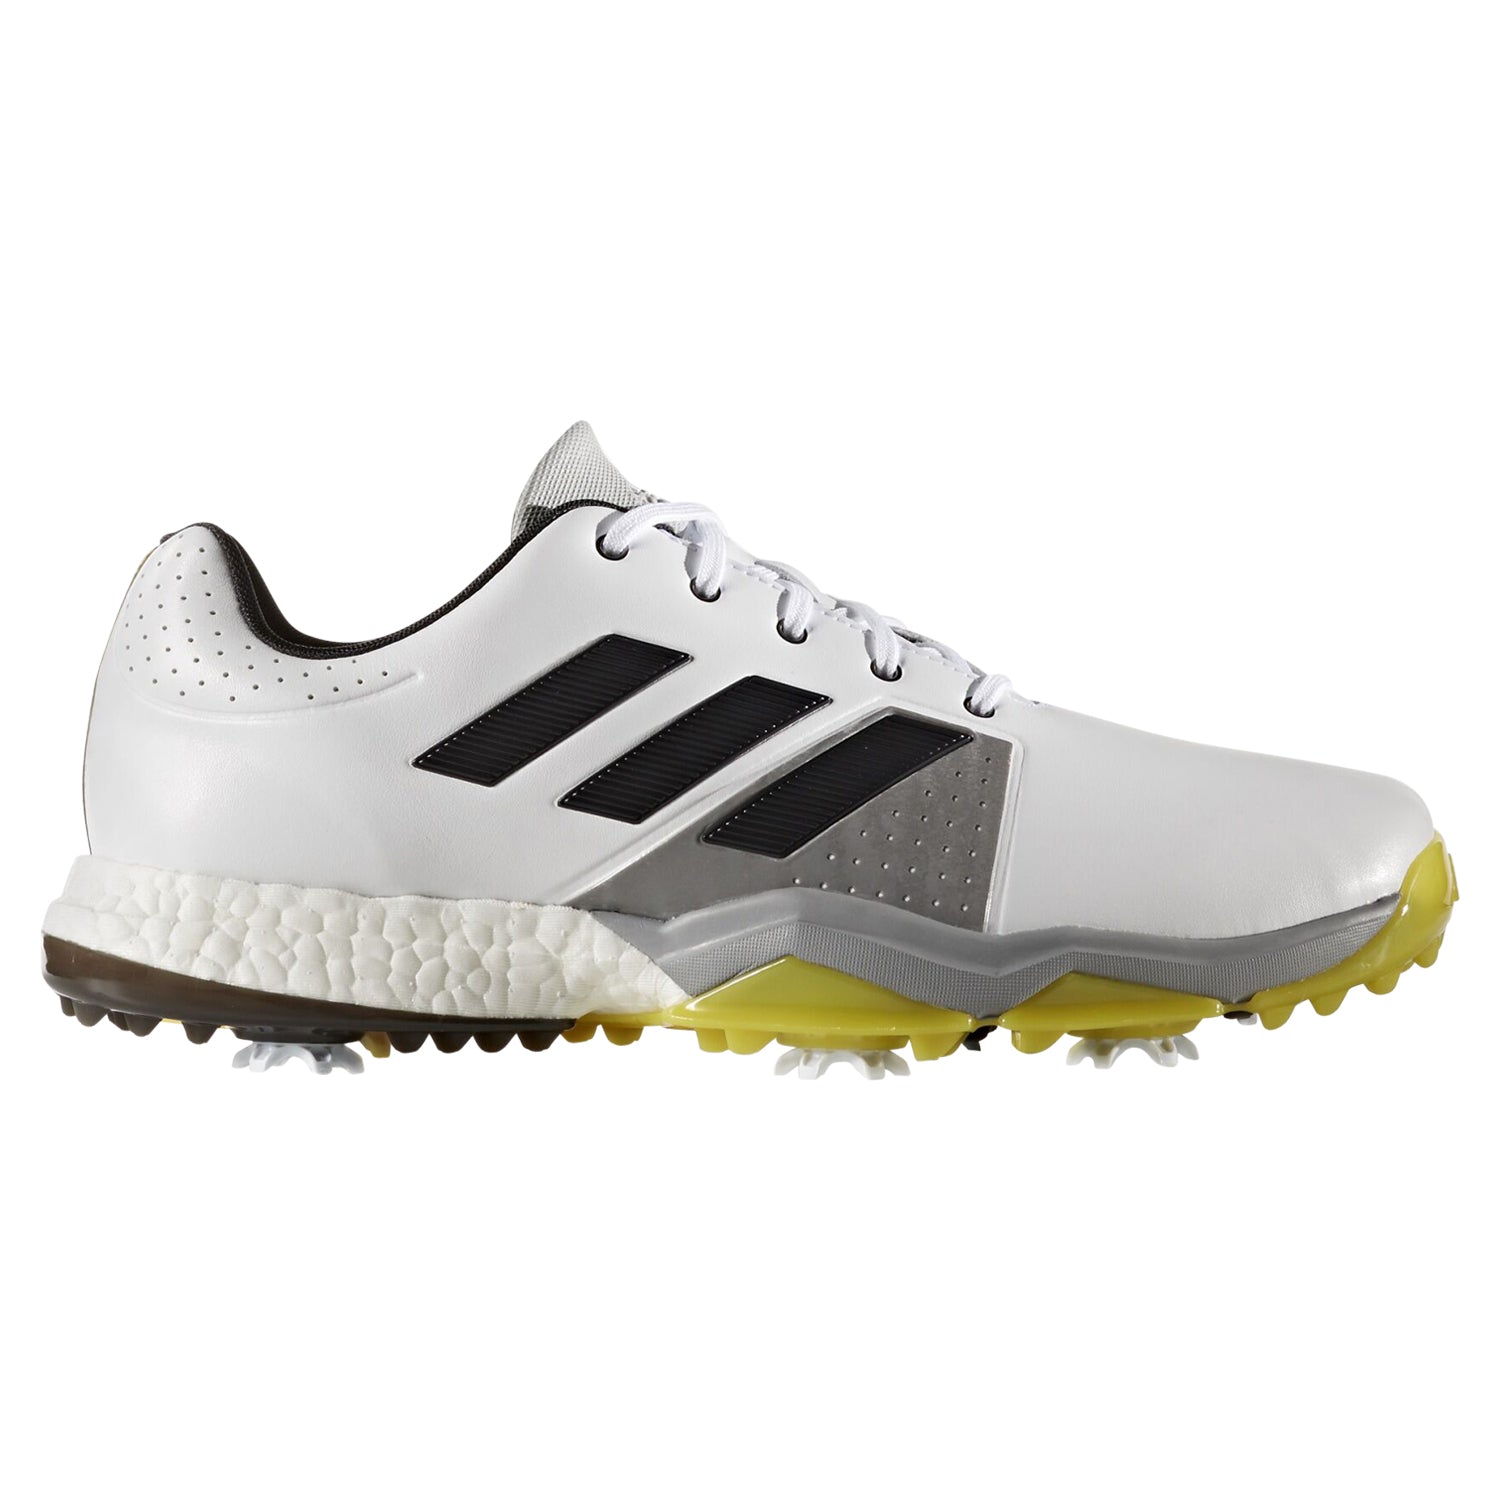 adipower boost shoes